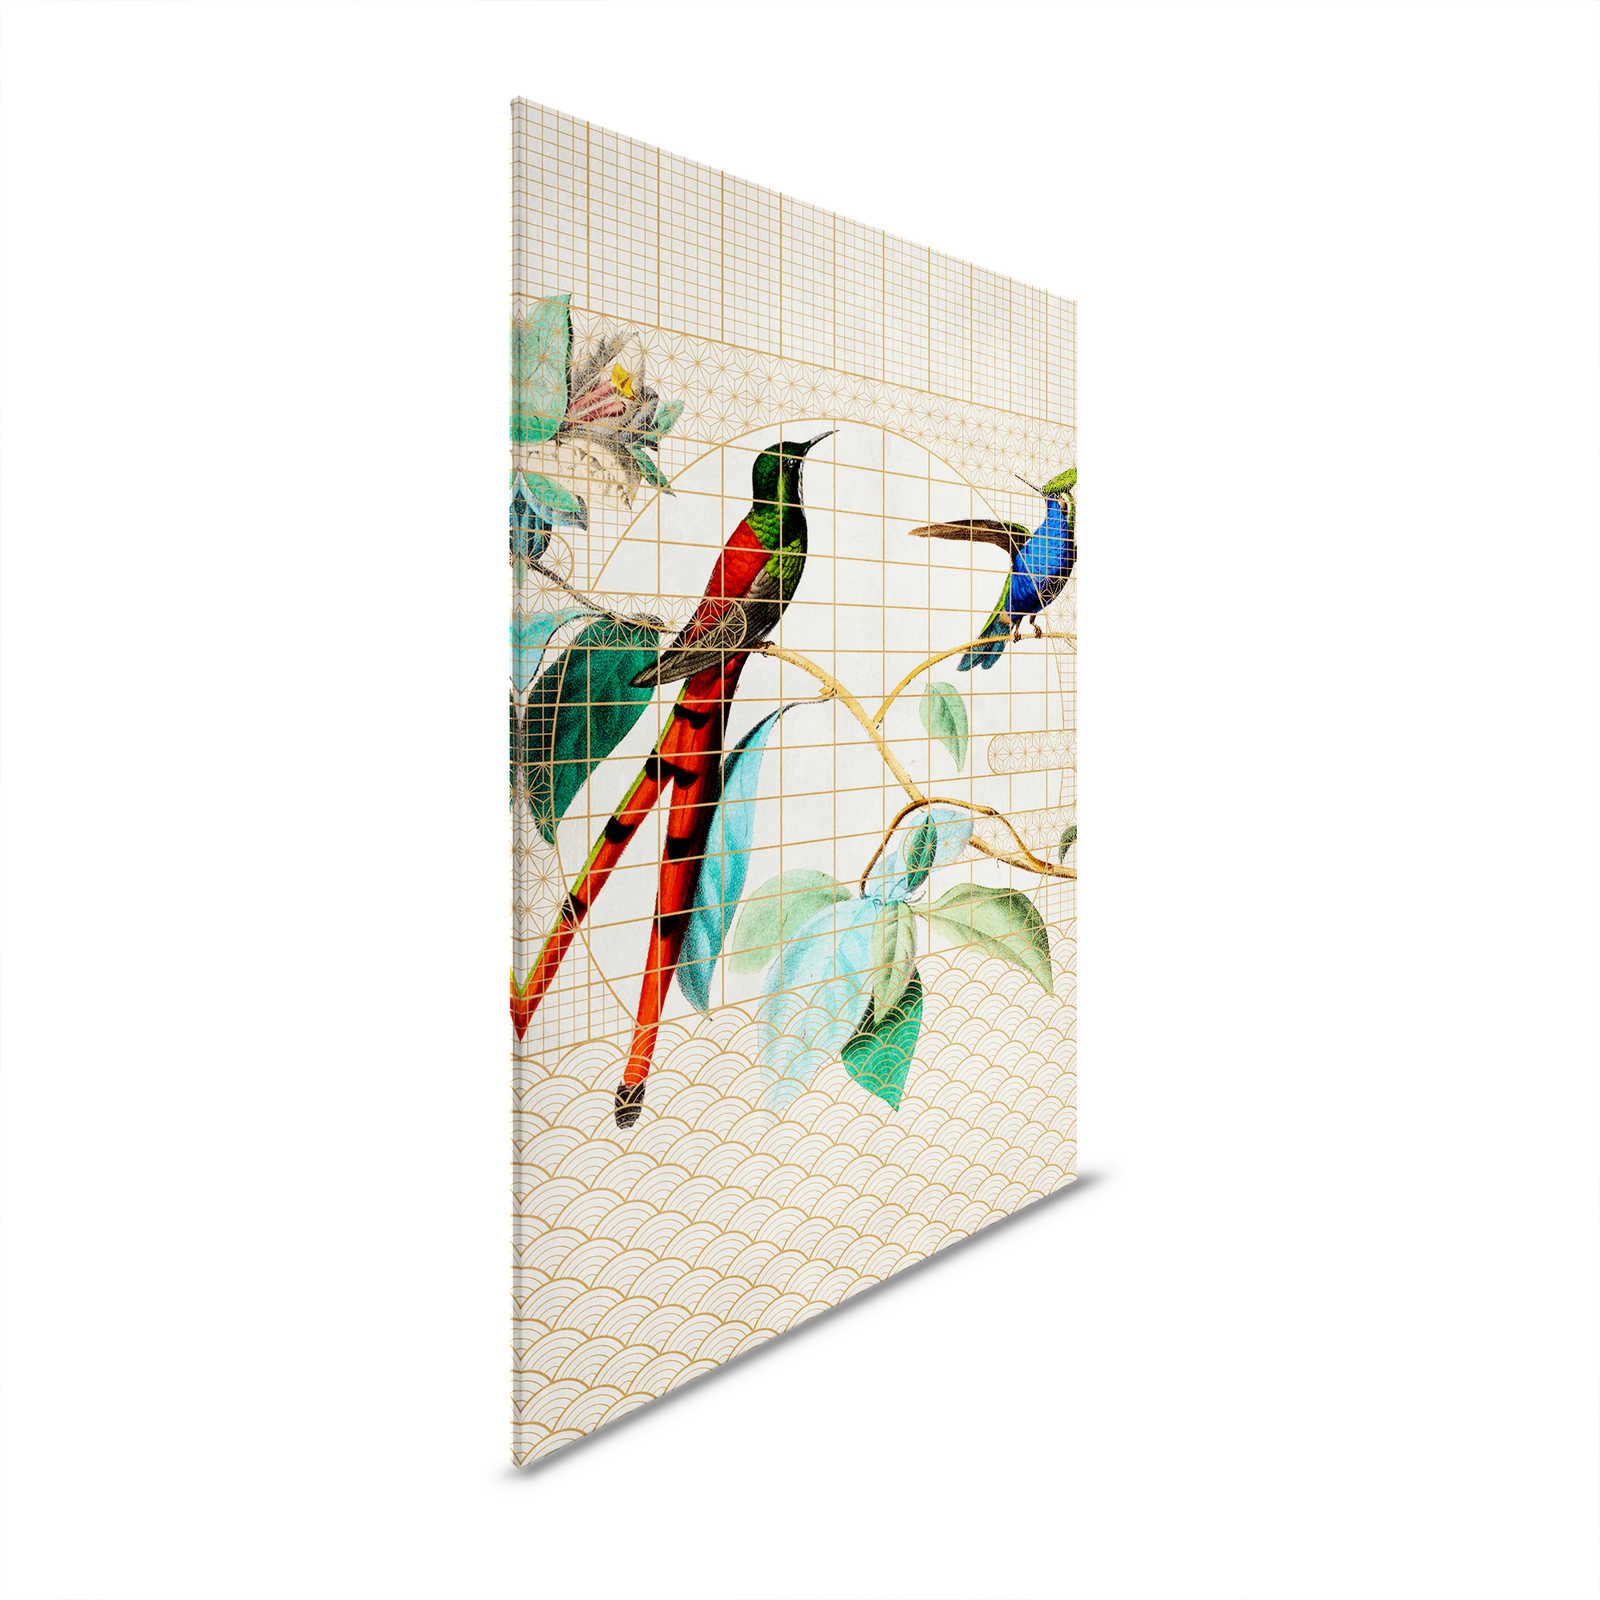         Aviary 2 - Birds Canvas painting Singing birds in a golden cage - 0.90 m x 0.60 m
    